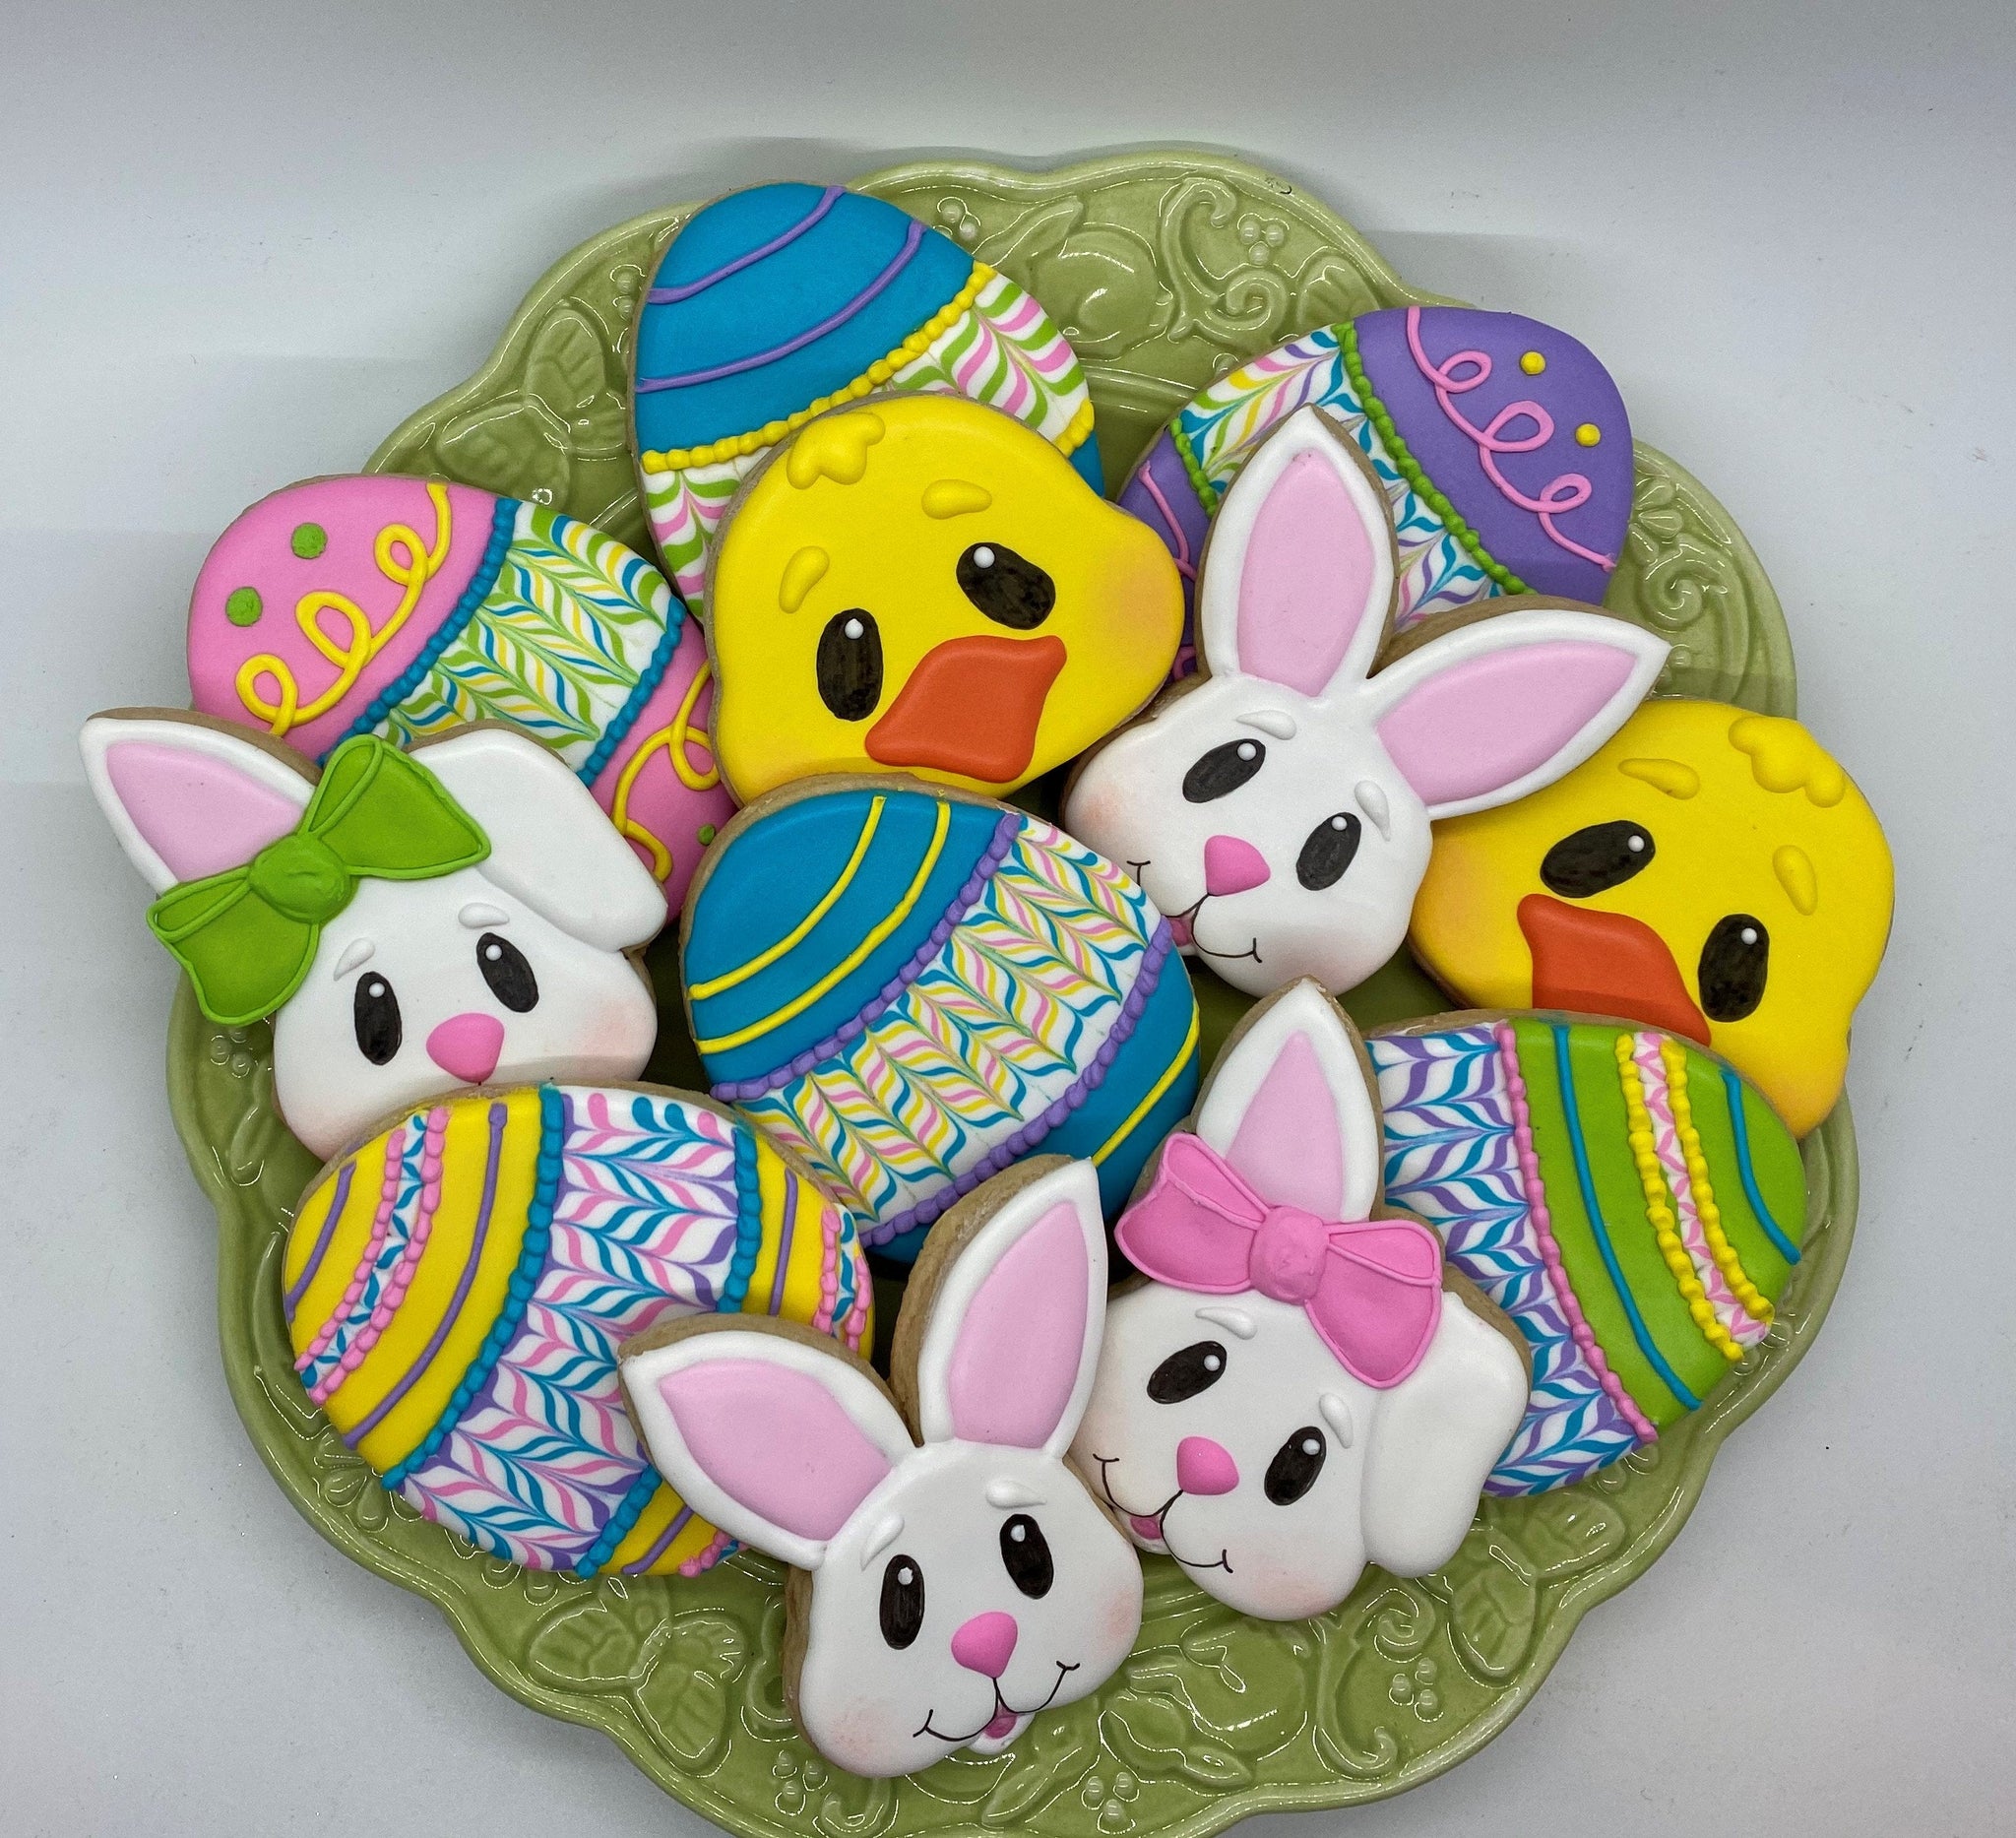 Easter Cookie Cutter Set